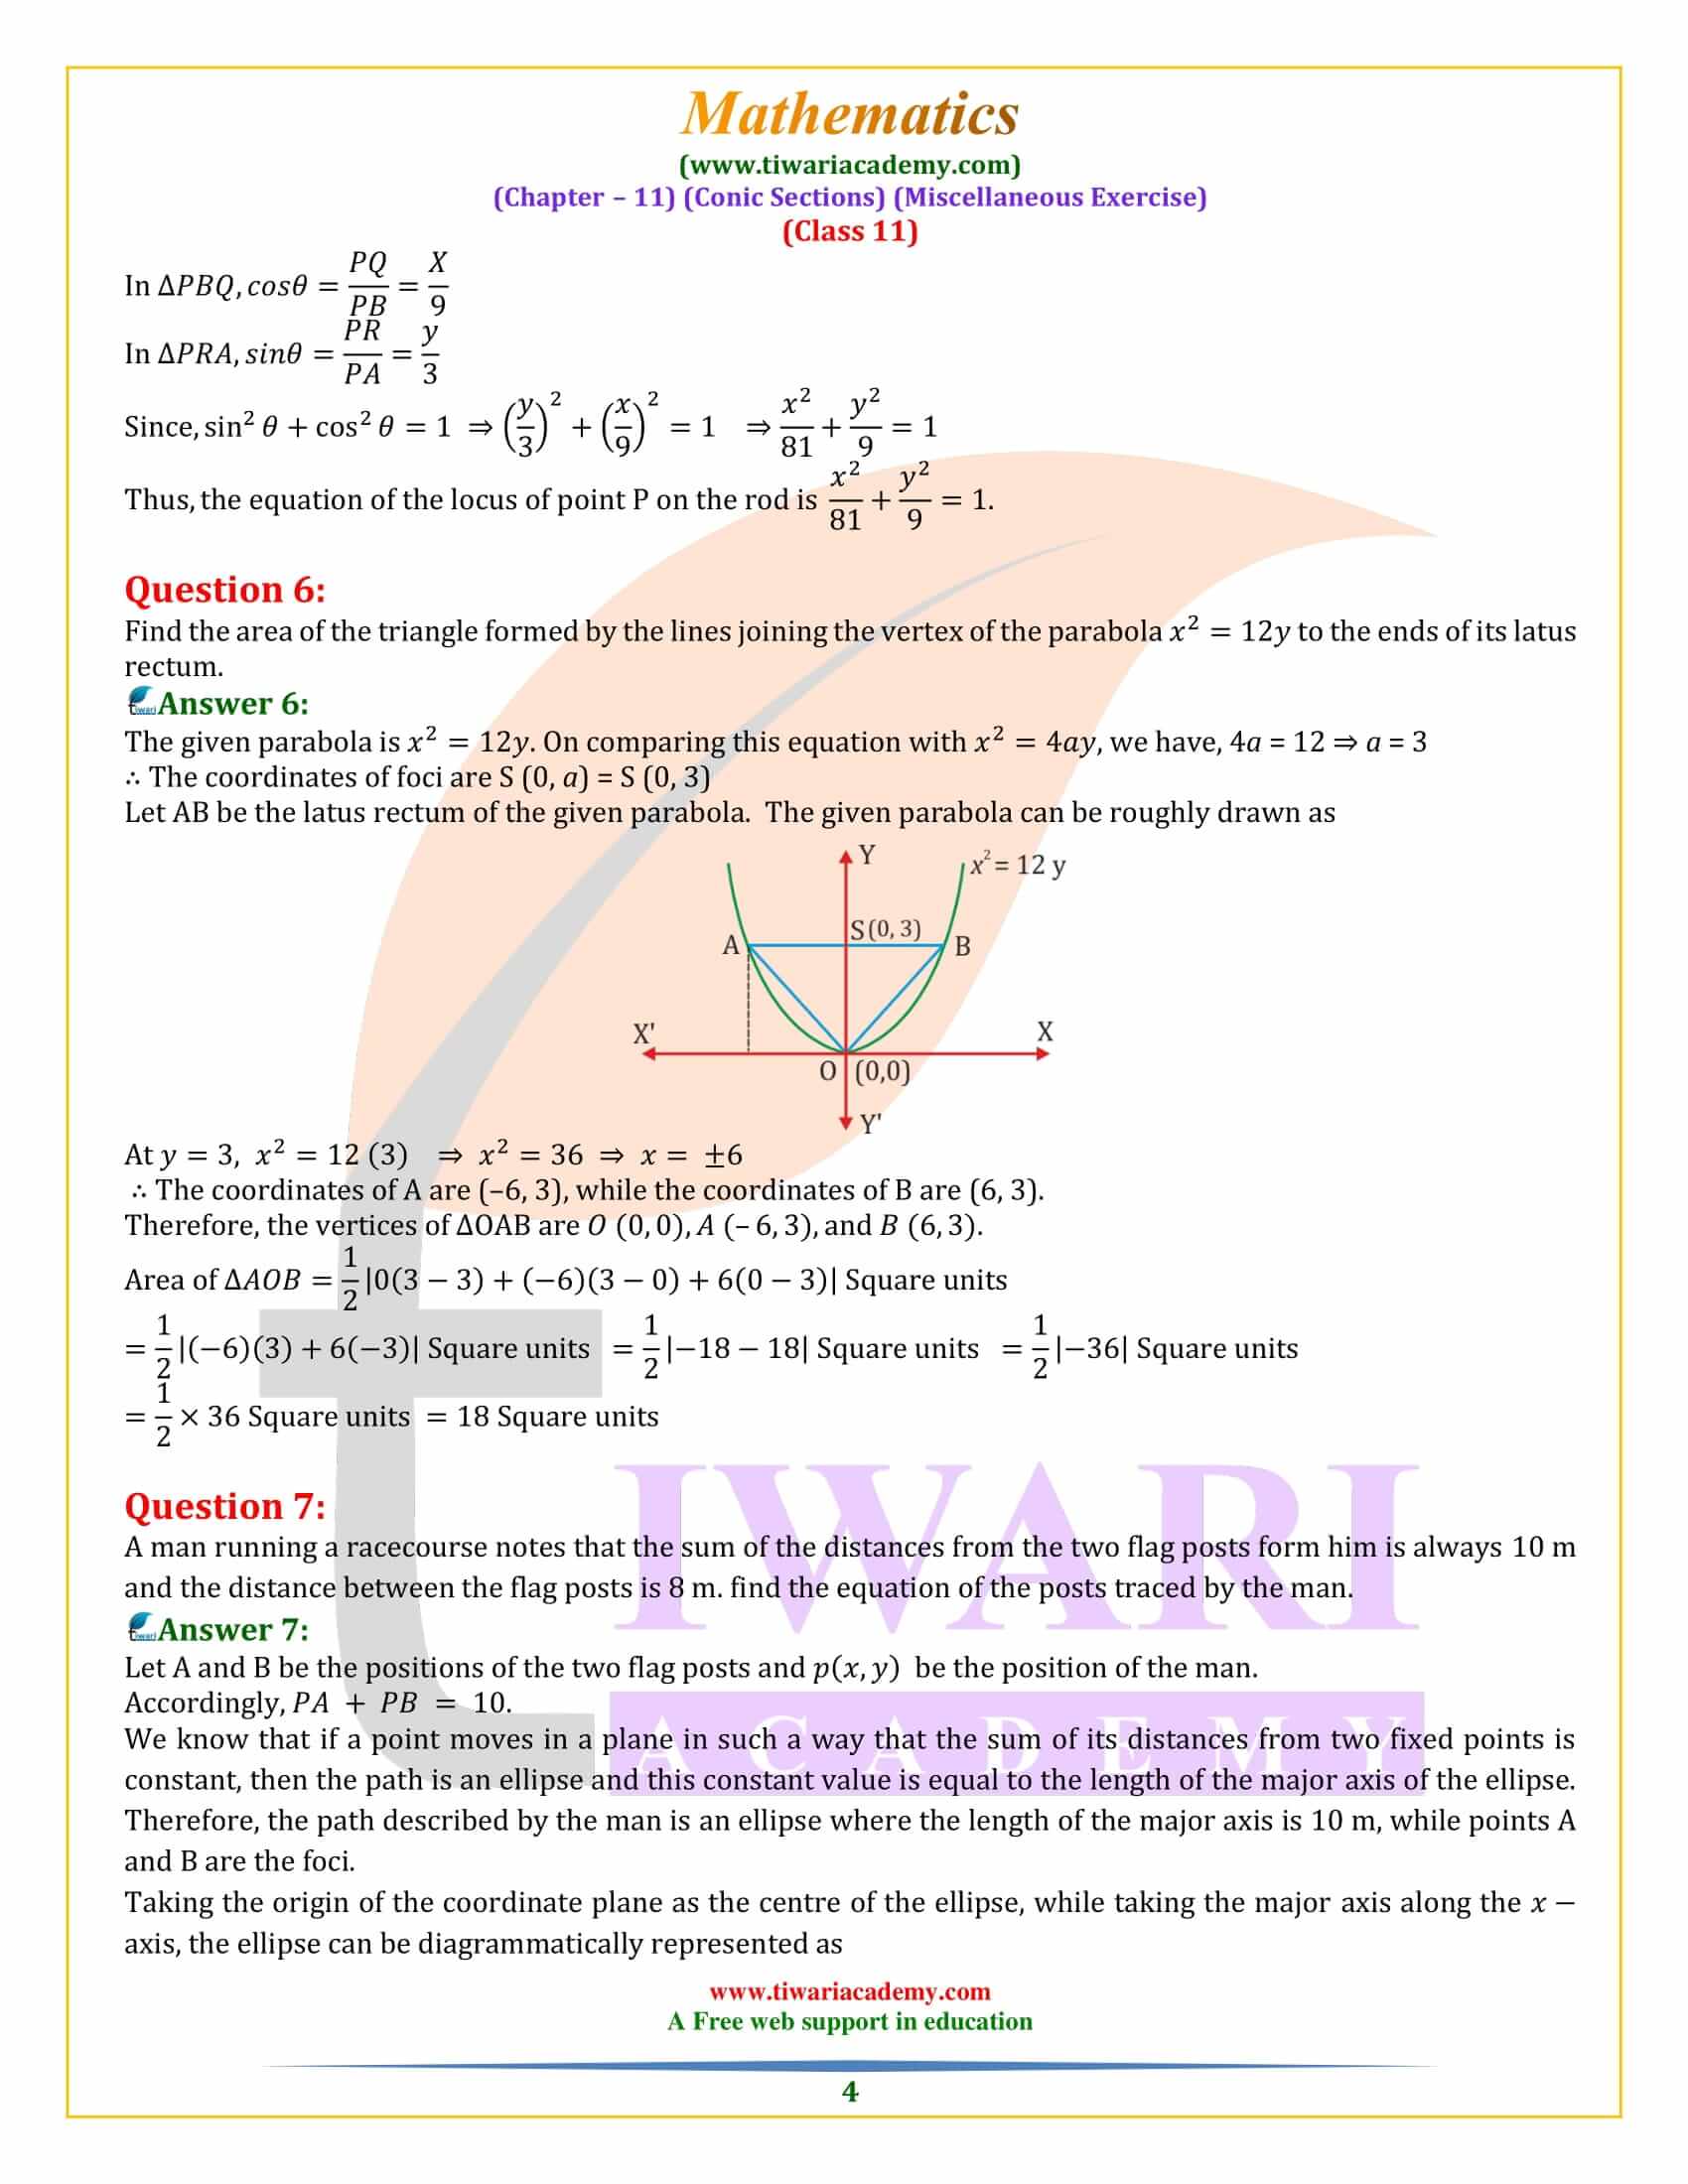 NCERT Solutions for Class 11 Maths Chapter 11 Miscellaneous Exercise